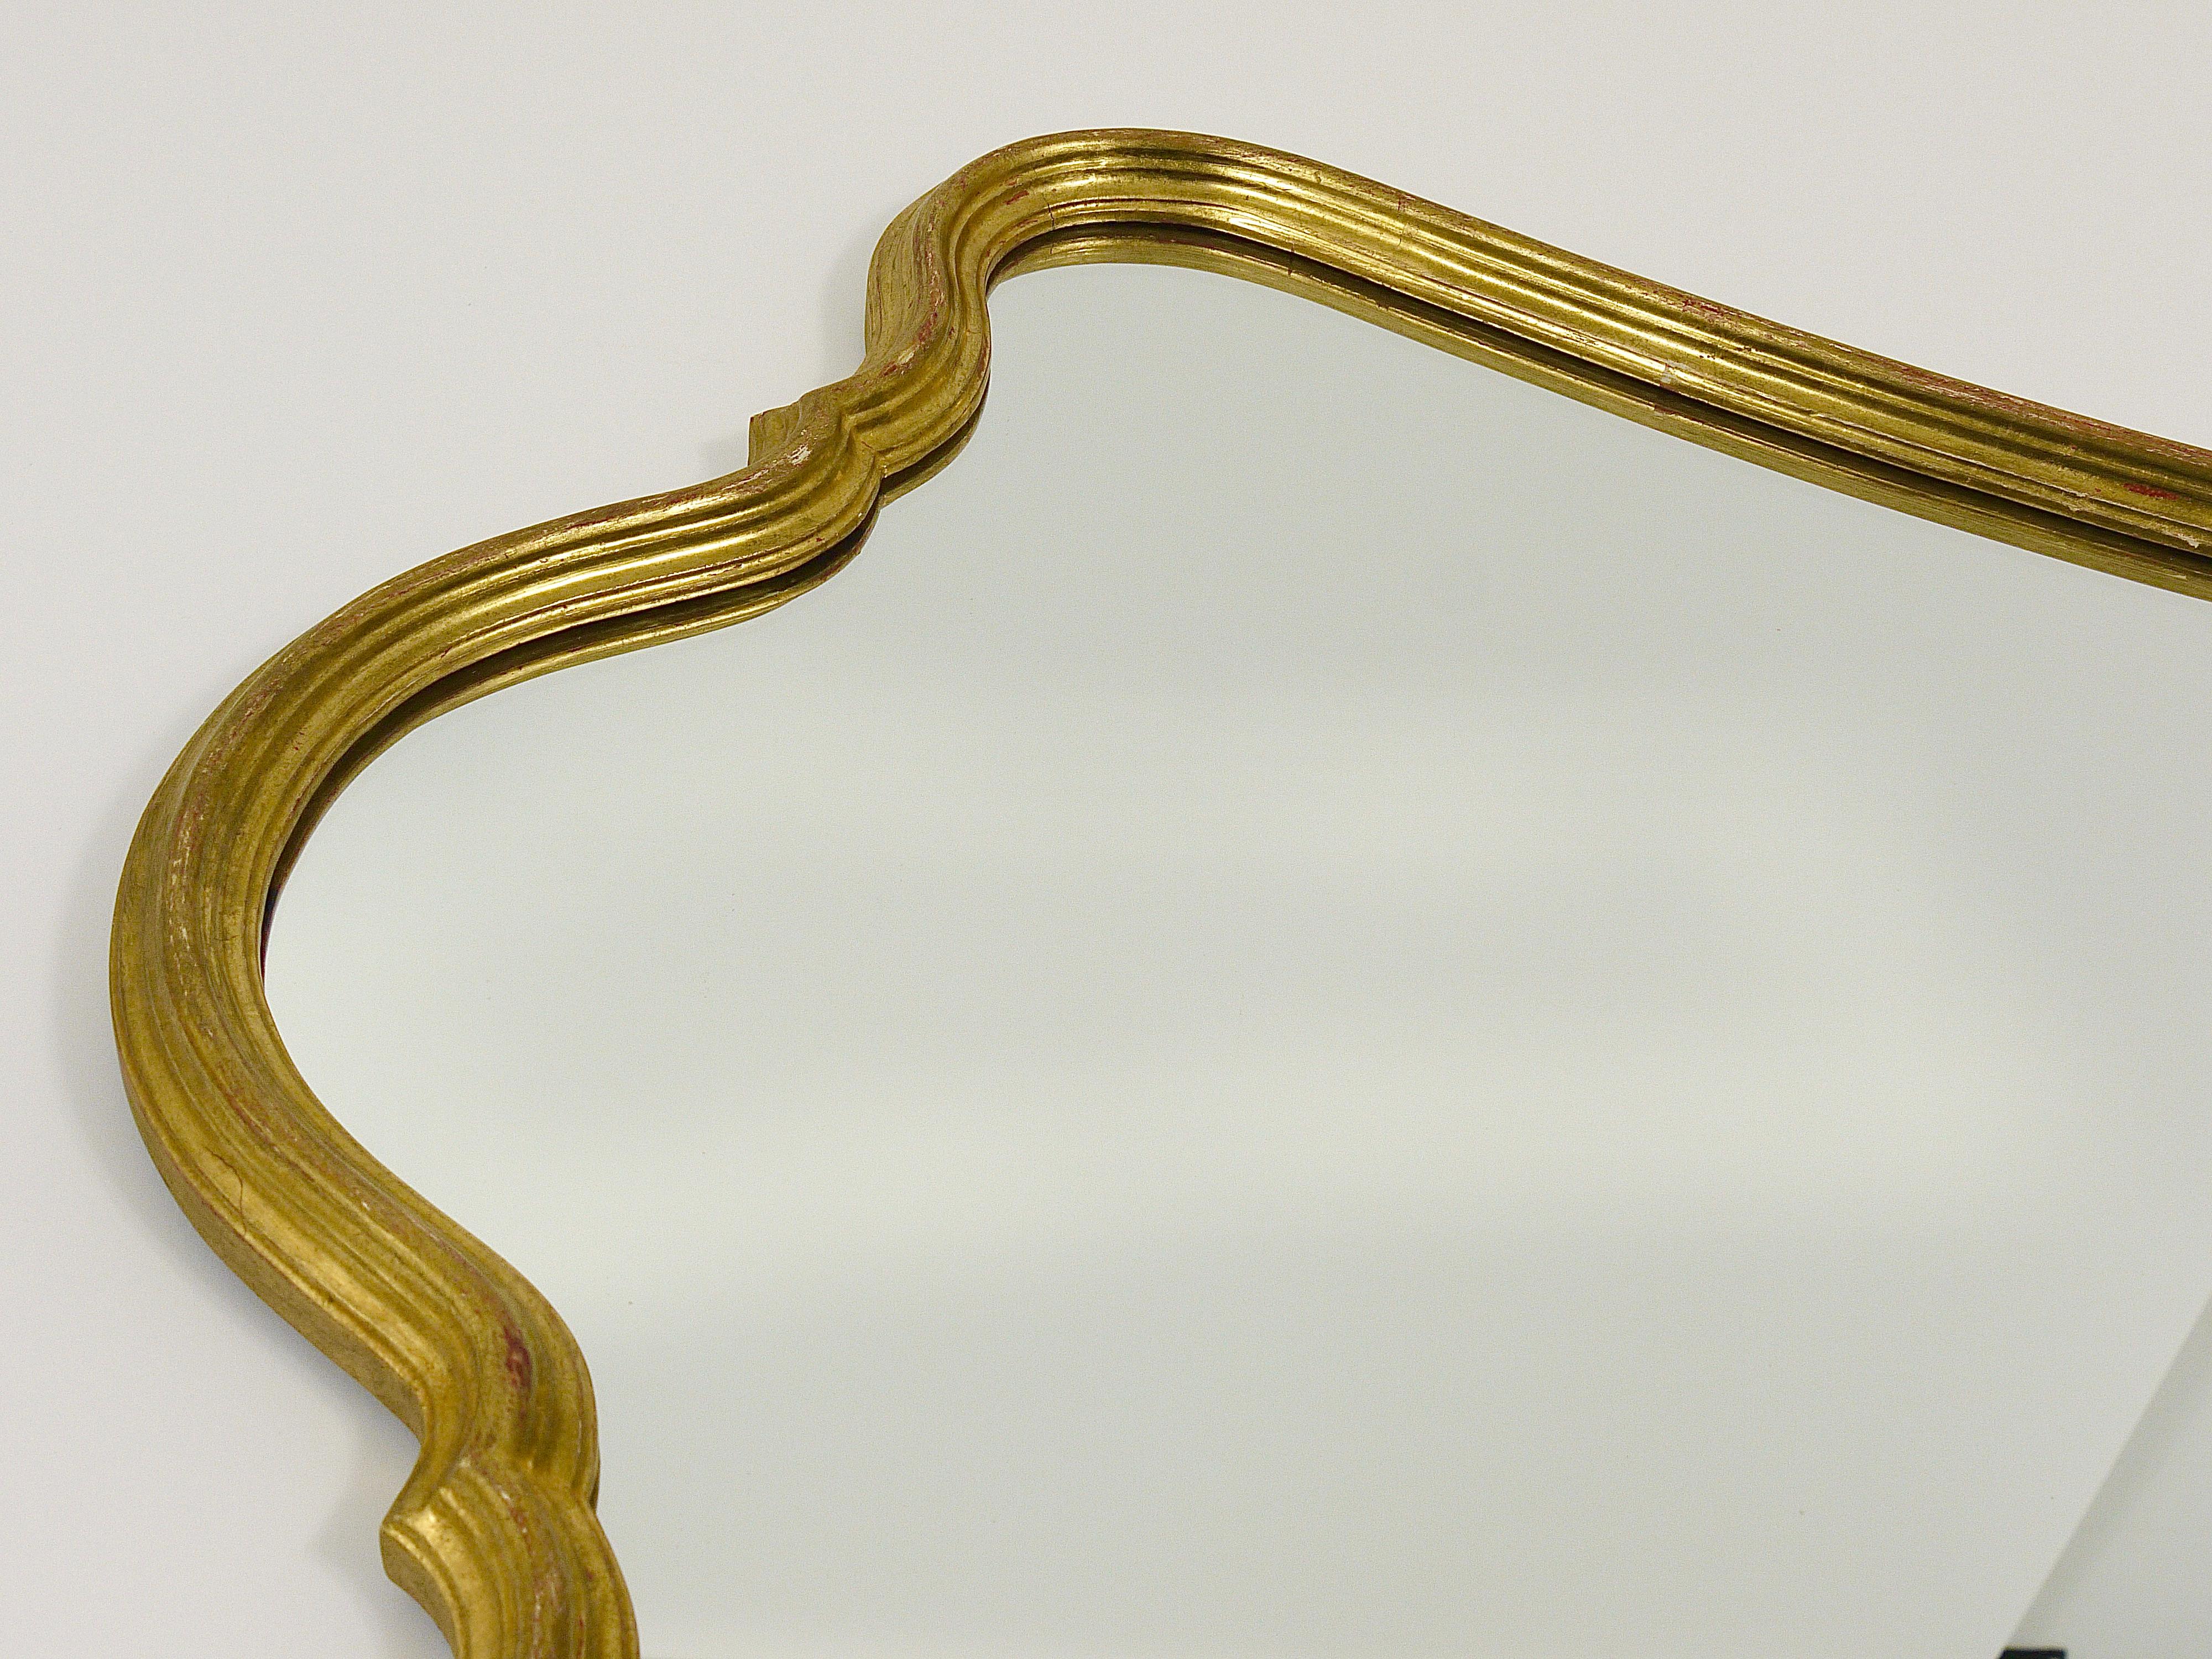 Chelini Firenze Curved Gilt Wood Mid-Century Wall Mirror, Italy, 1950s For Sale 4